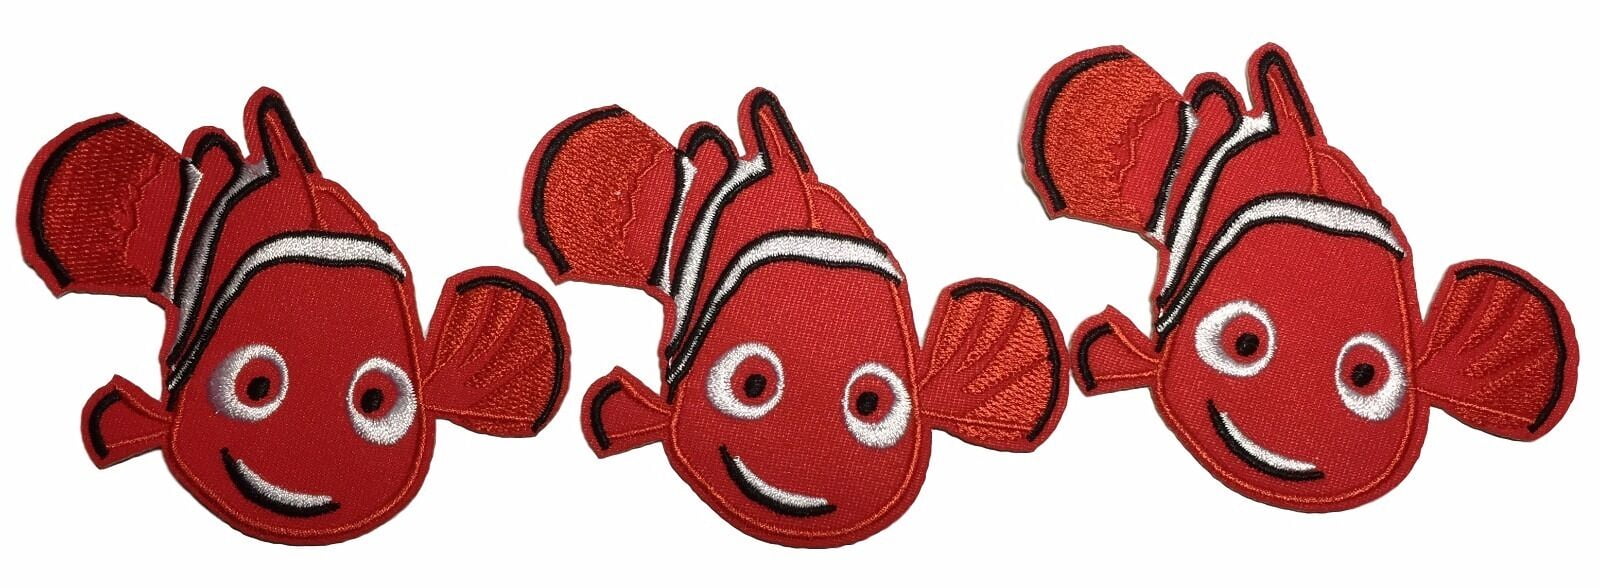 Disney PIXAR Finding Nemo cartoon children clothes Patch Iron-on transfers  for clothing vinyl stickers